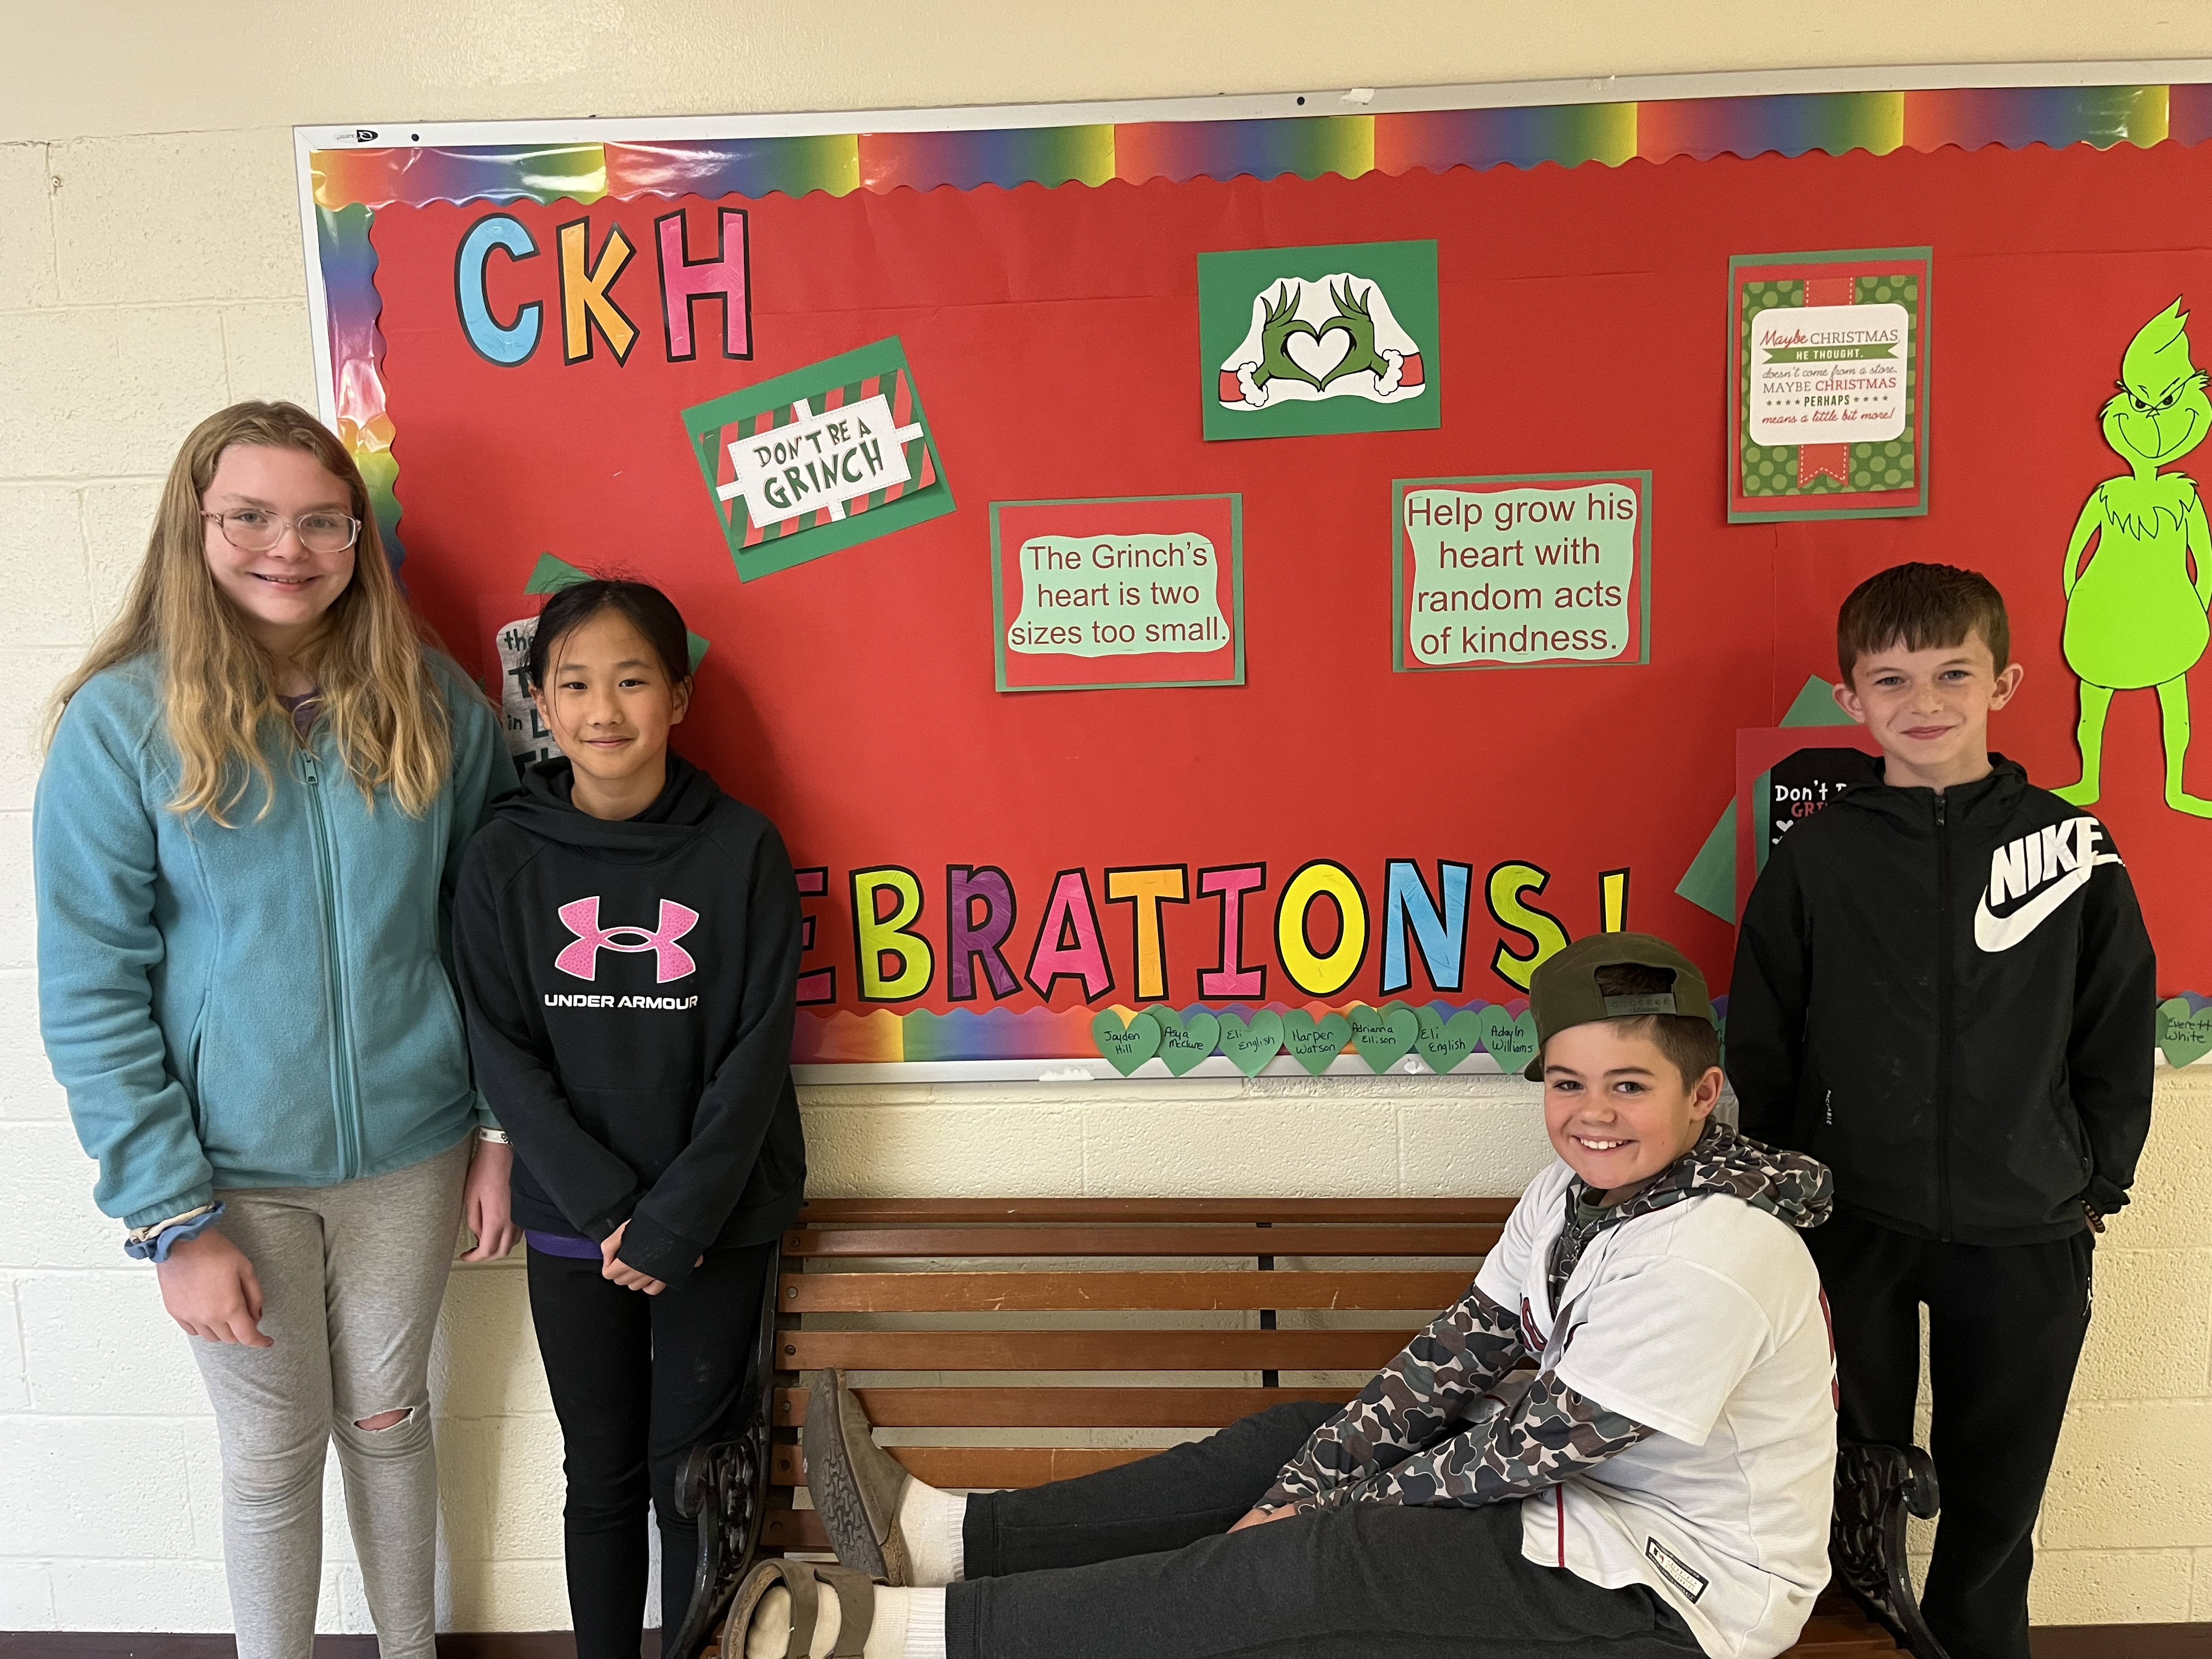 5th graders smiling for the camera in front of a red bulletin board